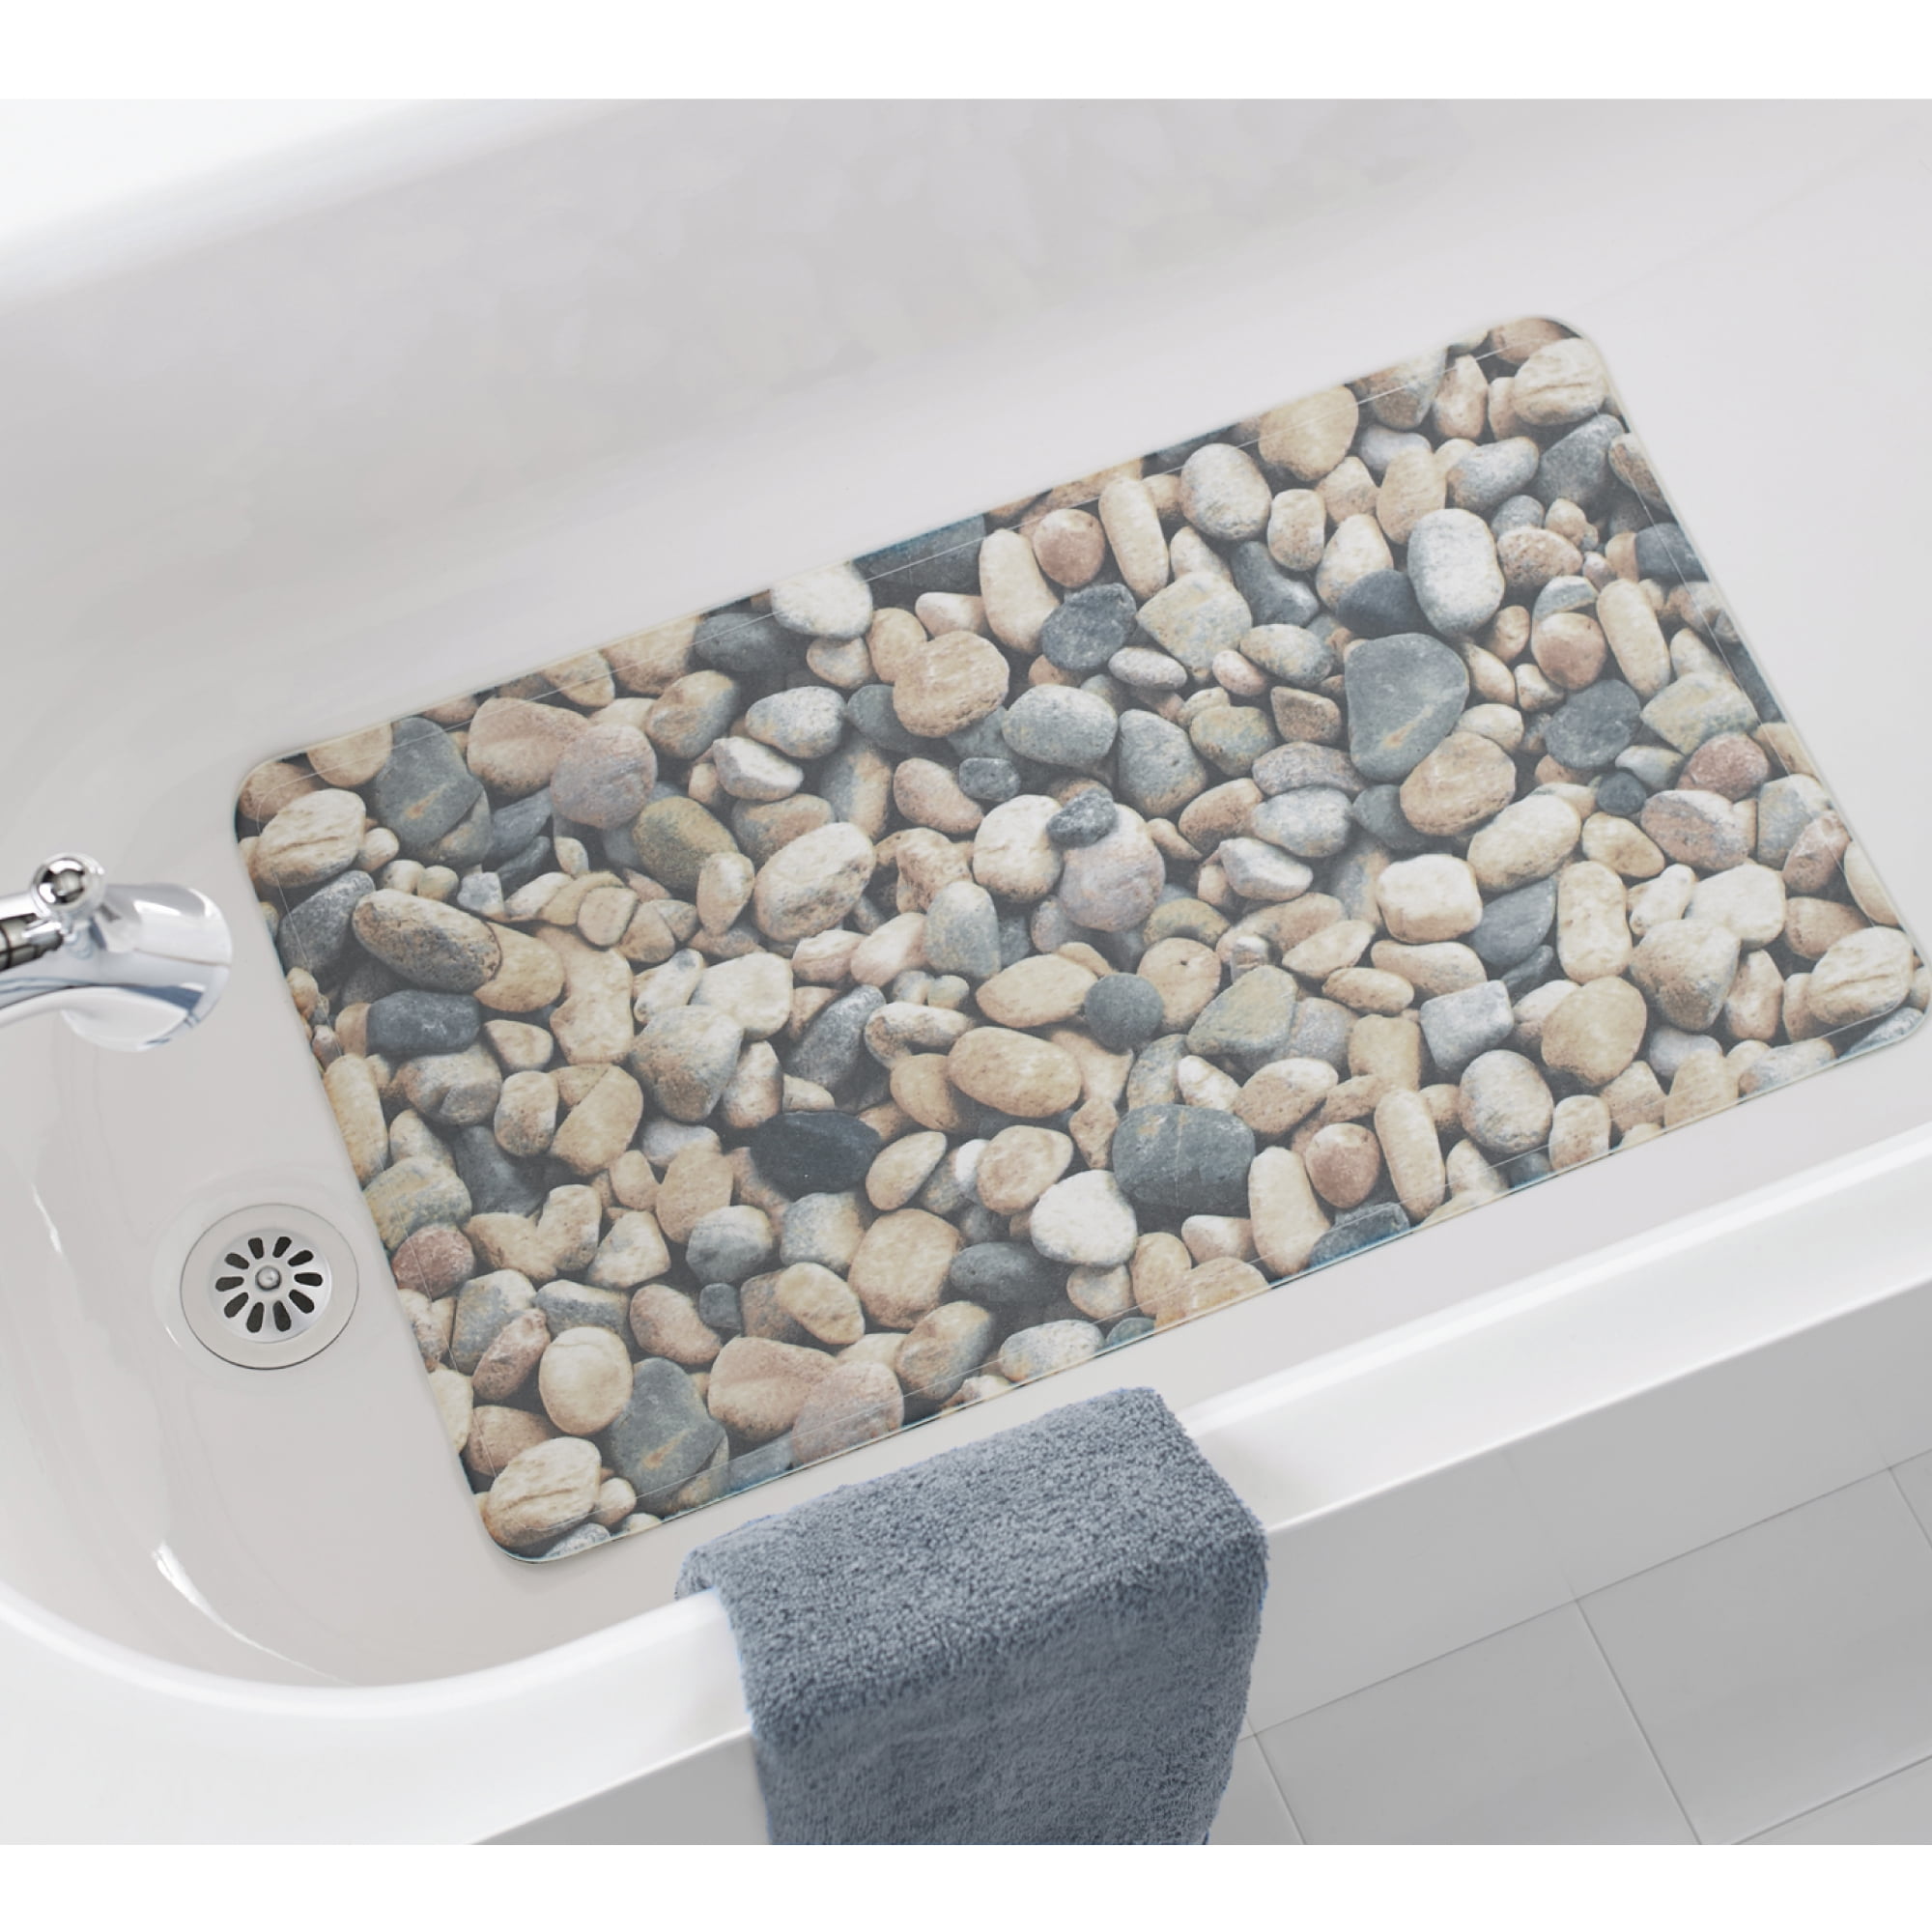 The Best Bath Stone Mats for Your Bathroom The Real Deal by RetailMeNot